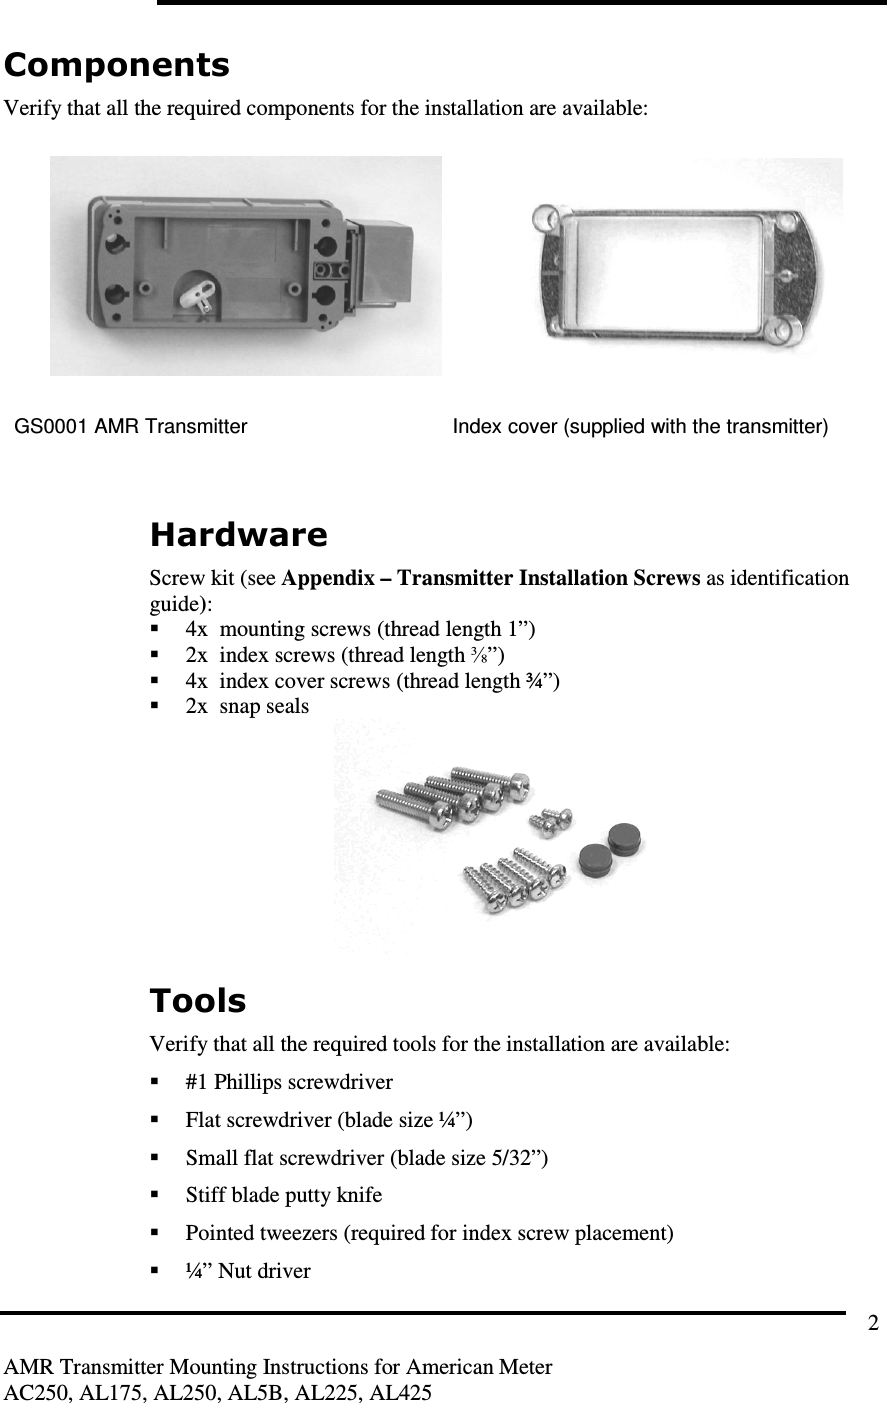         AMR Transmitter Mounting Instructions for American Meter AC250, AL175, AL250, AL5B, AL225, AL425 2 Components Verify that all the required components for the installation are available:    GS0001 AMR Transmitter  Index cover (supplied with the transmitter)   Hardware Screw kit (see Appendix – Transmitter Installation Screws as identification guide):  4x  mounting screws (thread length 1”)  2x  index screws (thread length ⅜”)  4x  index cover screws (thread length ¾”)  2x  snap seals  Tools Verify that all the required tools for the installation are available:  #1 Phillips screwdriver  Flat screwdriver (blade size ¼”)  Small flat screwdriver (blade size 5/32”)  Stiff blade putty knife  Pointed tweezers (required for index screw placement)  ¼” Nut driver 